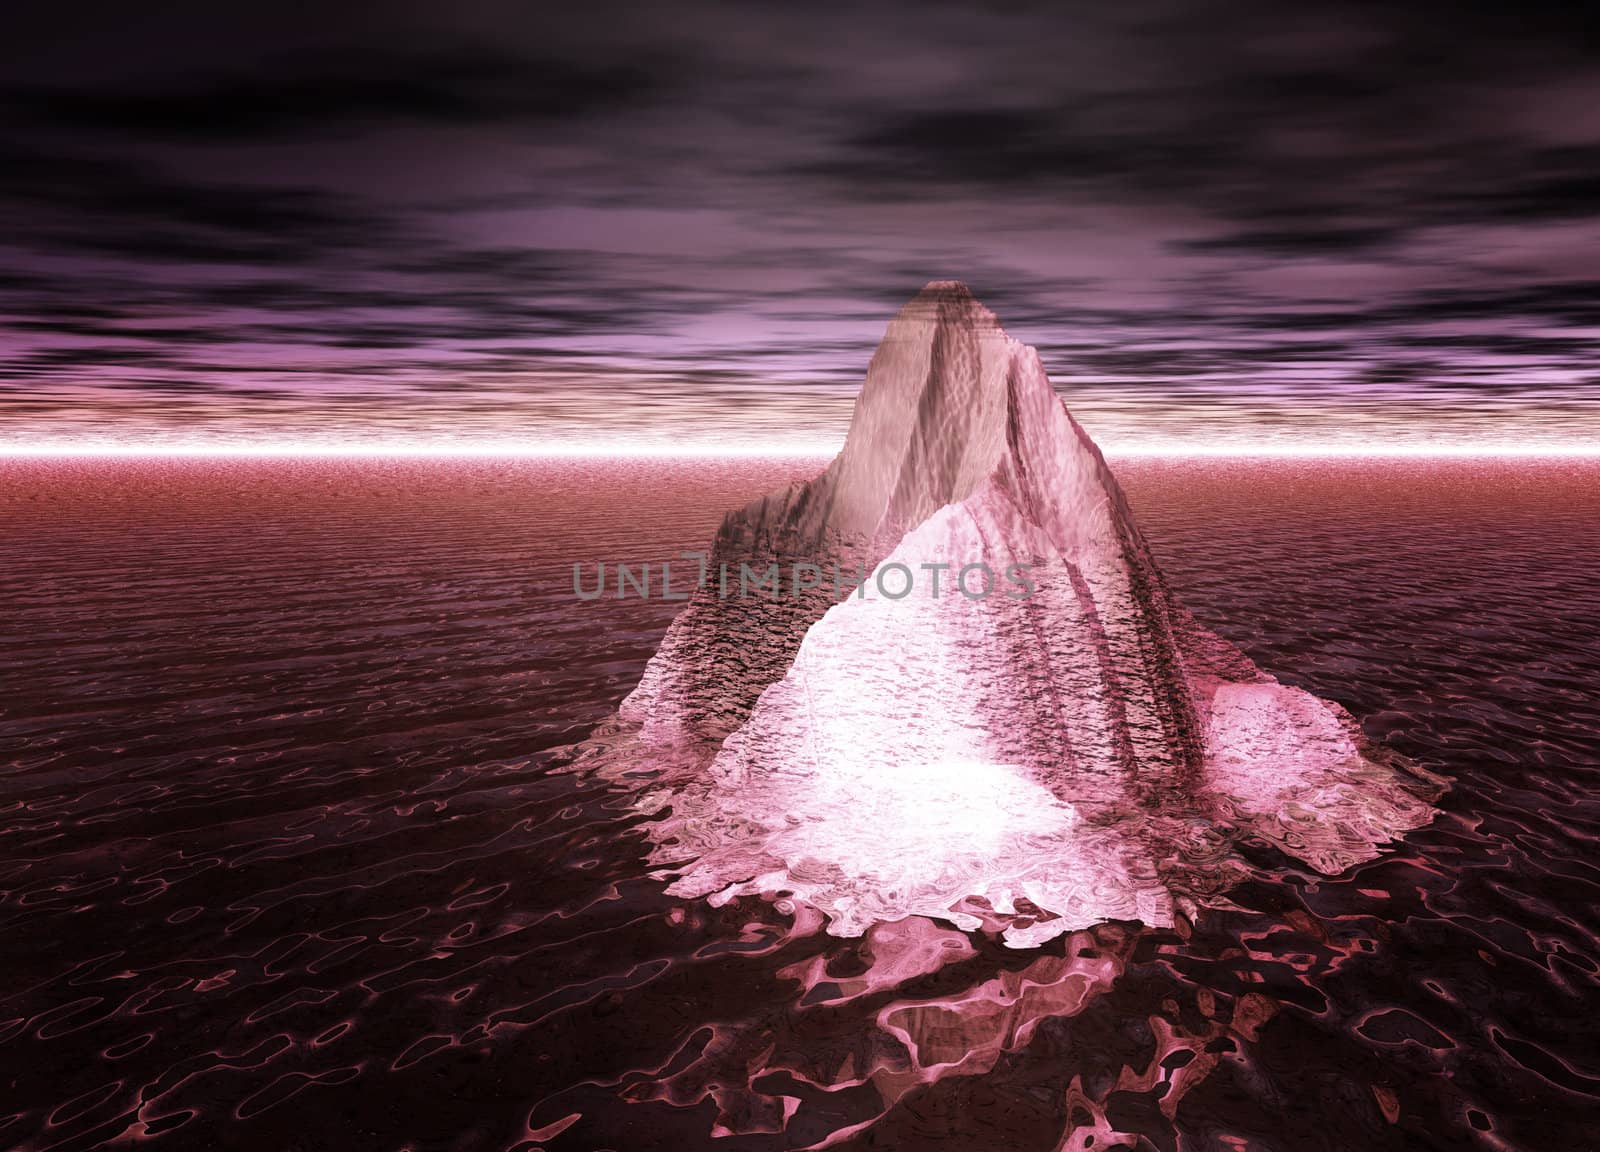 Iceberg Floating on a Red Ocean With Sky on Mars Fantasy Illustration